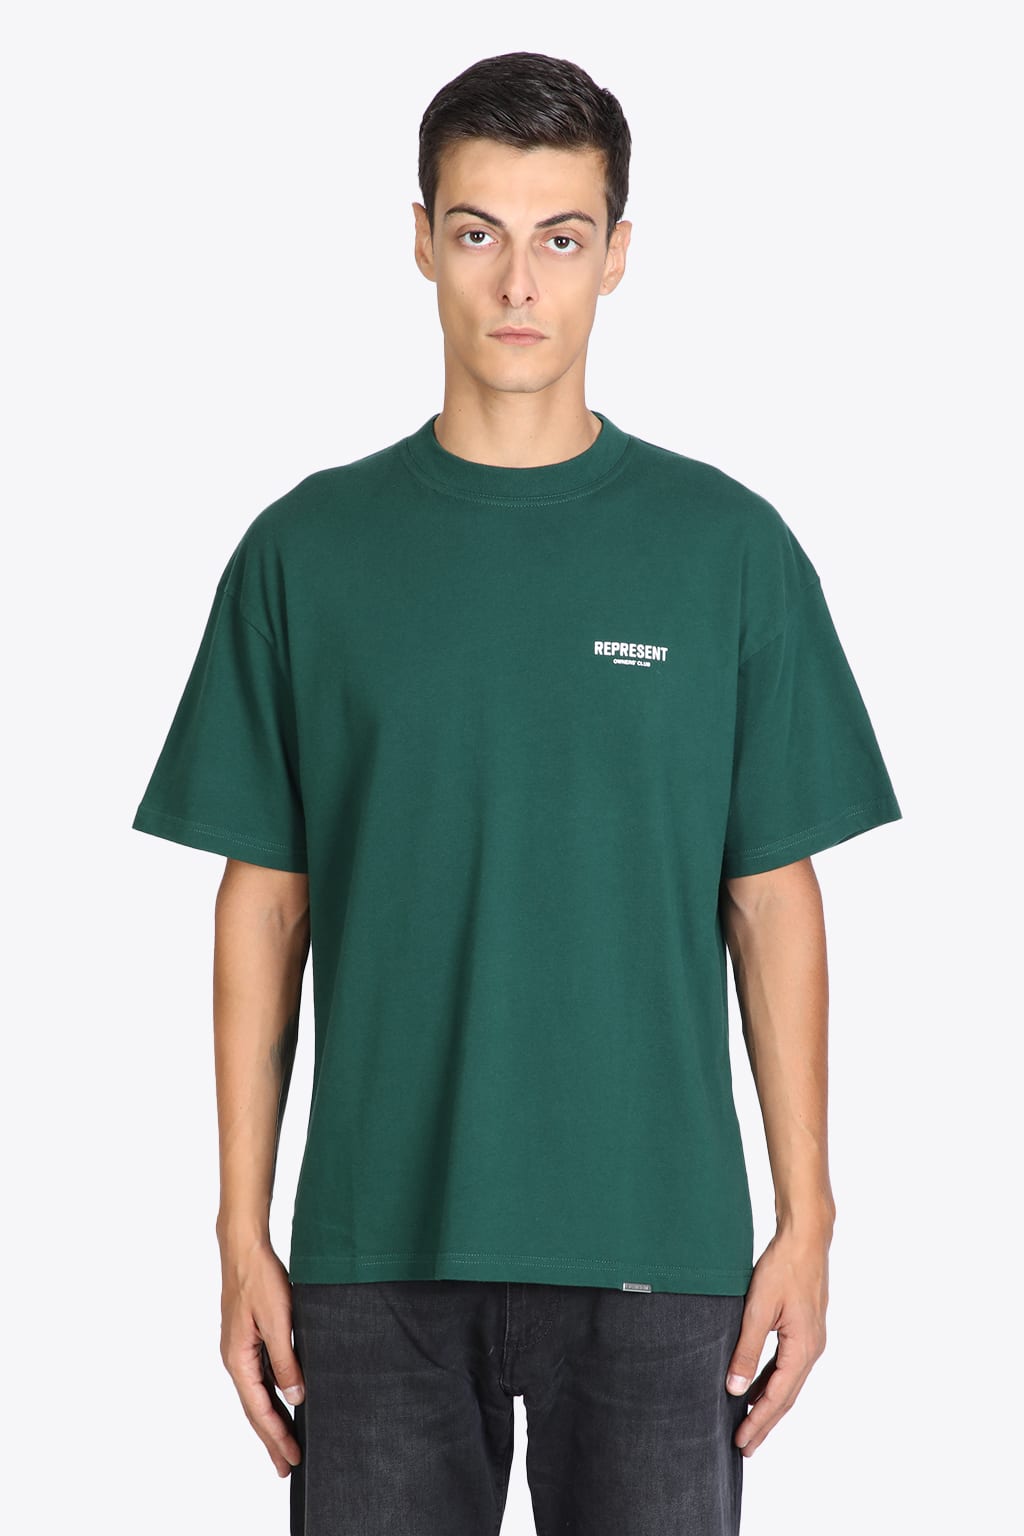 Represent Owners Club T-shirt Green cotton t-shirt with chest logo - Owners club t-shirt